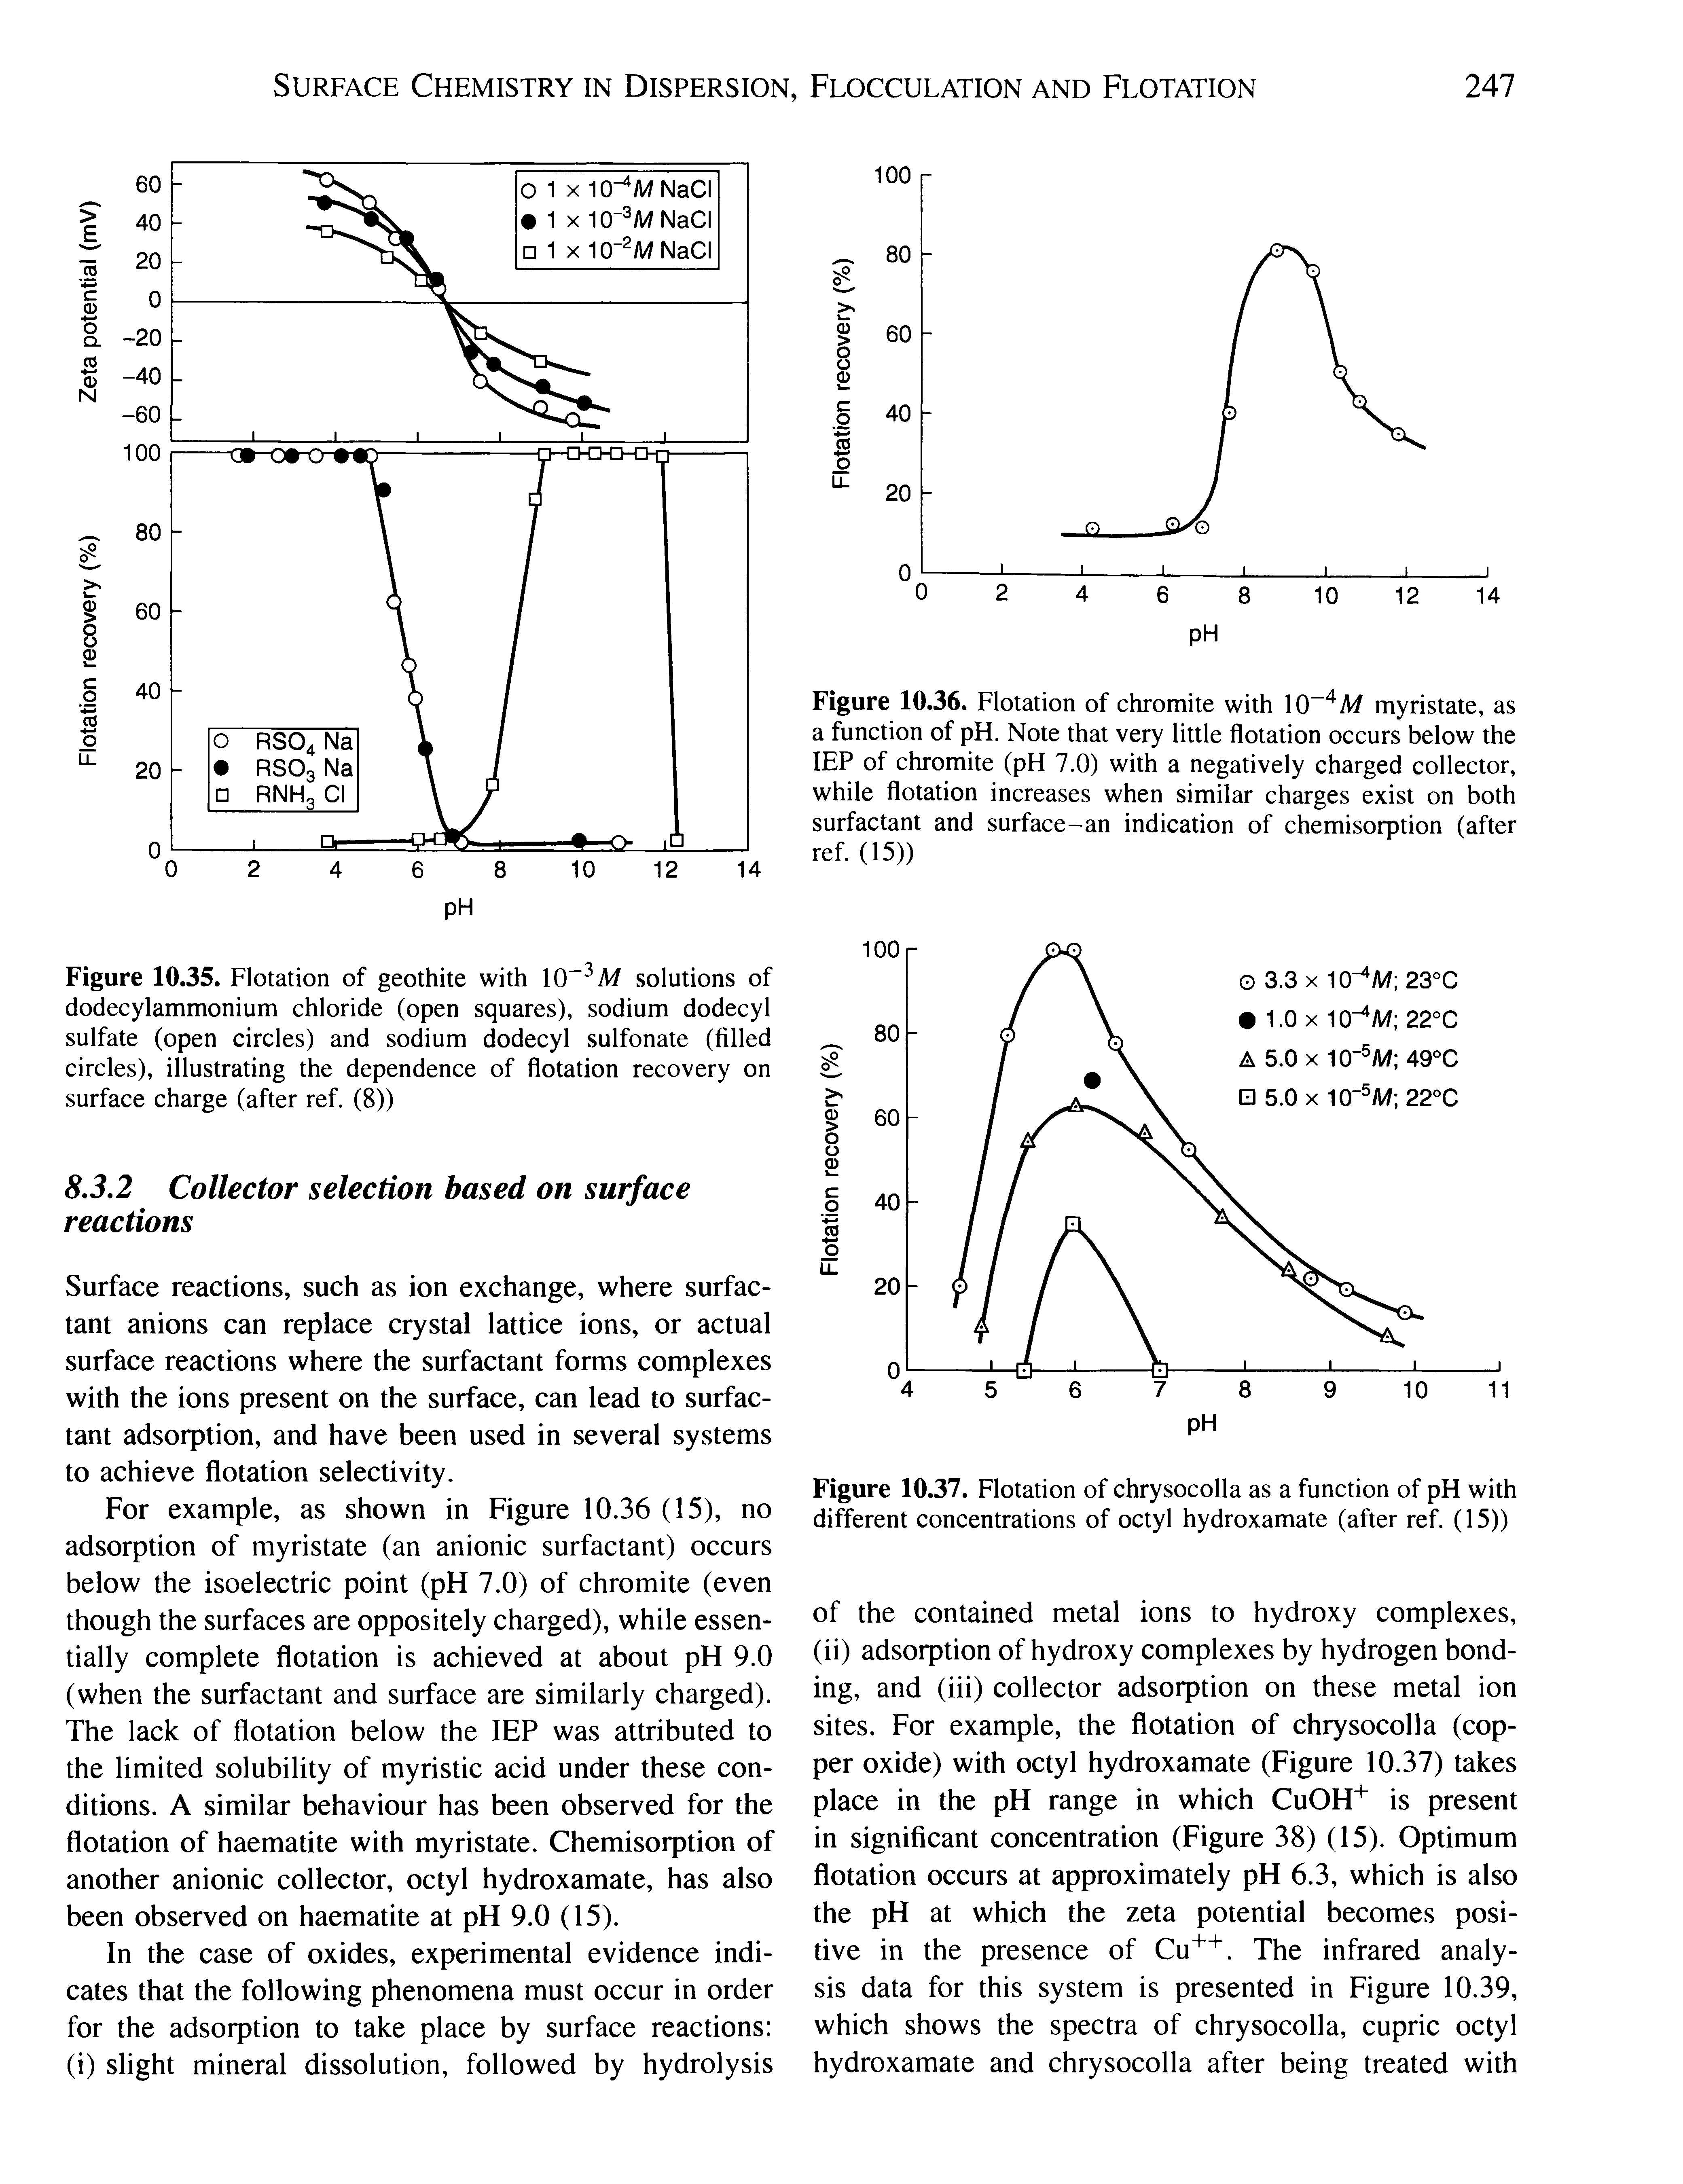 Figure 10.35. Flotation of geothite with 10" M solutions of dodecylammonium chloride (open squares), sodium dodecyl sulfate (open circles) and sodium dodecyl sulfonate (filled circles), illustrating the dependence of flotation recovery on surface charge (after ref. (8))...